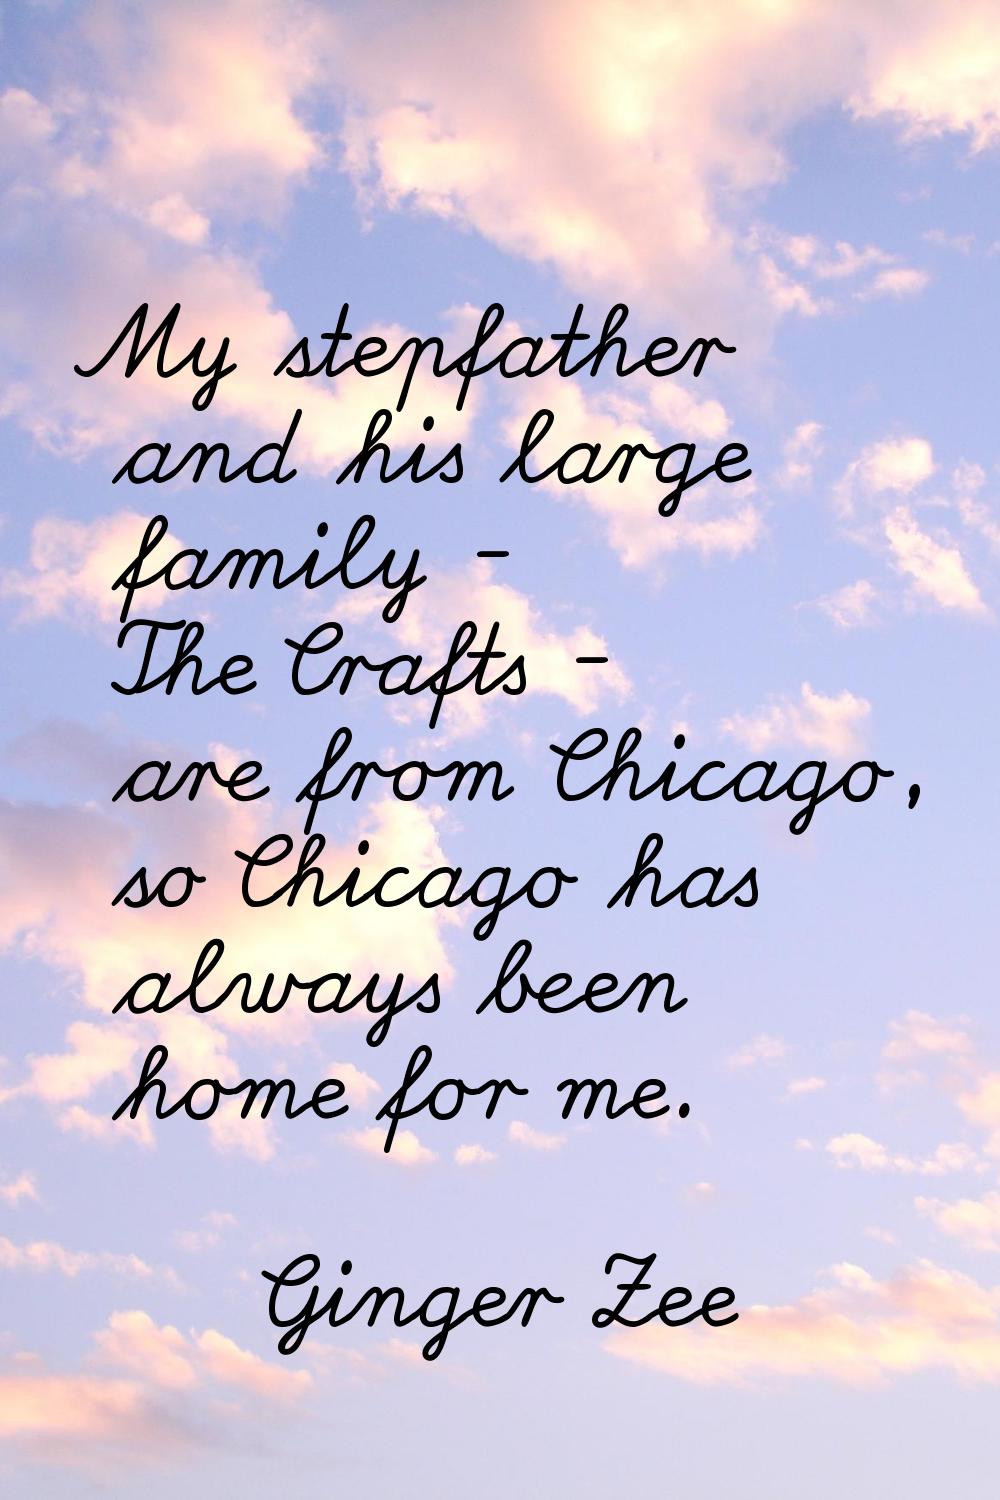 My stepfather and his large family - The Crafts - are from Chicago, so Chicago has always been home